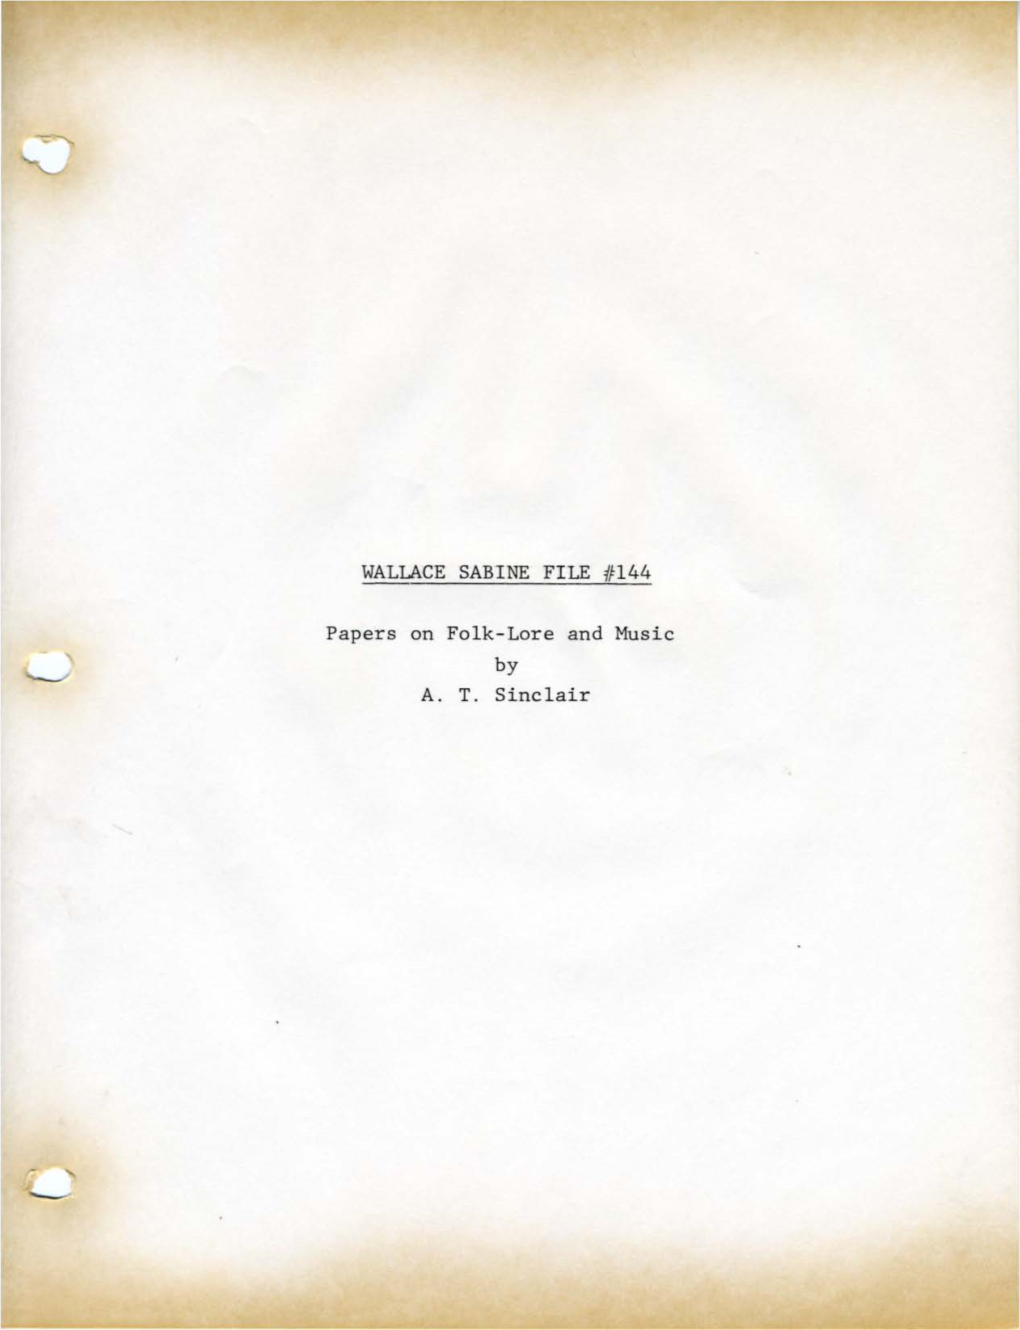 WALLACE SABINE FILE #144 Papers on Folk-Lore and Music A. T. Sinclair